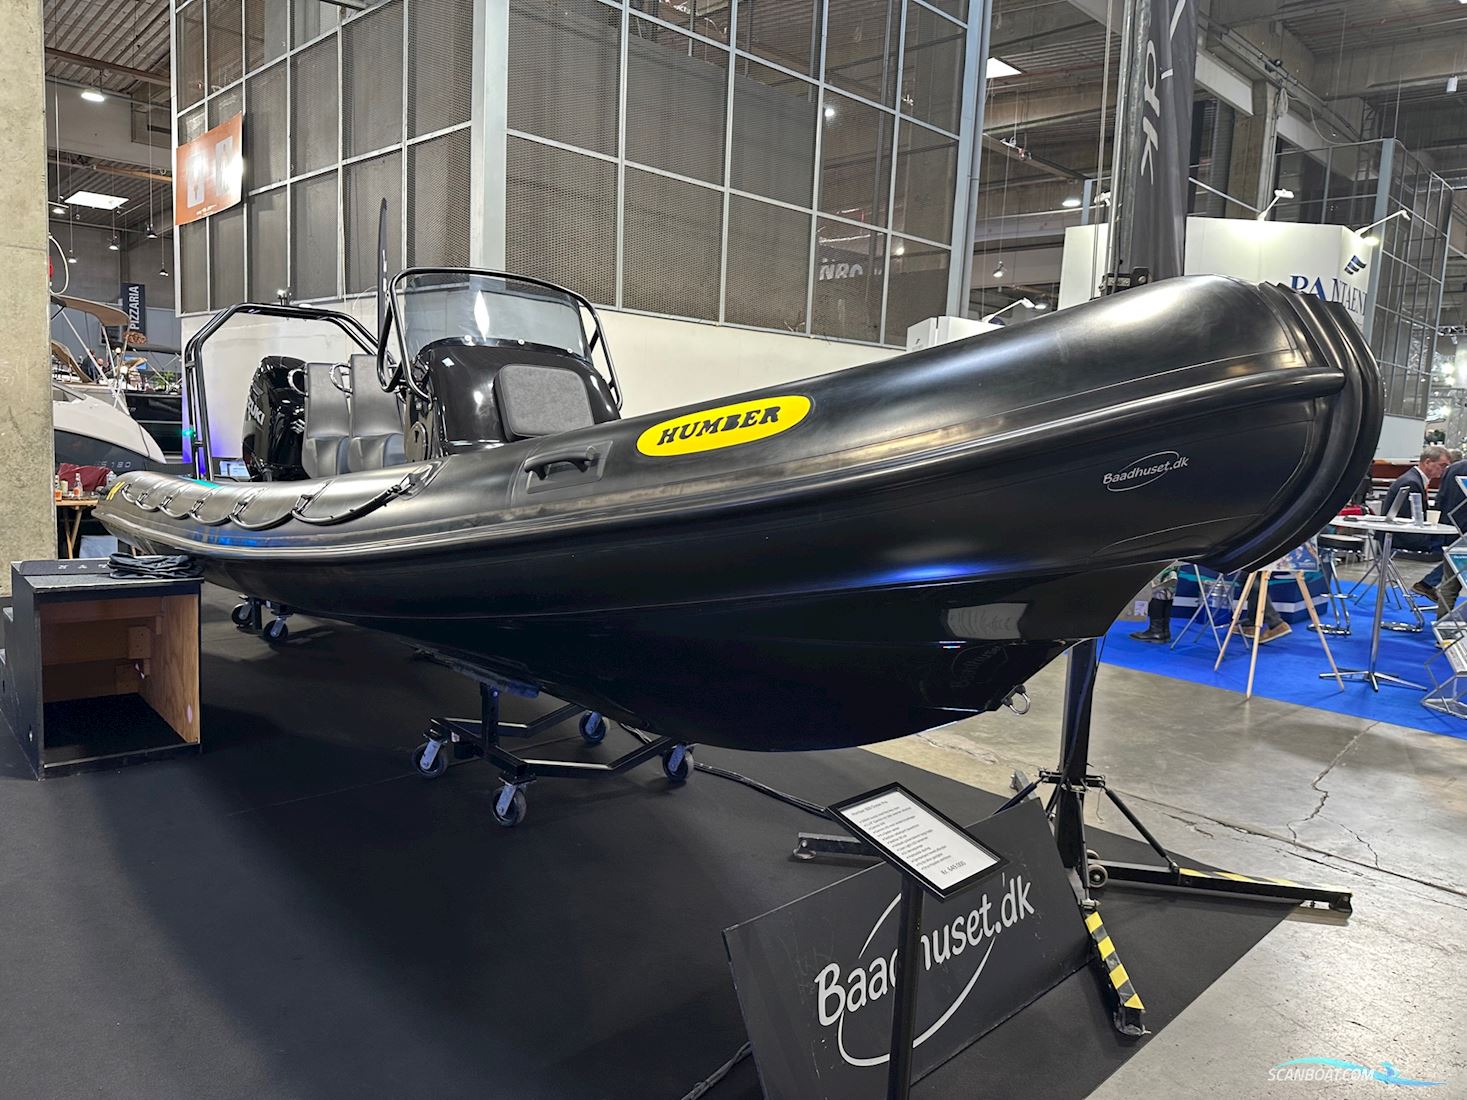 https://www.scanboat.com/images/boats/schlauchboot--rib-humber-800-ocean-pro-scanboat-picture-24646274.jpg